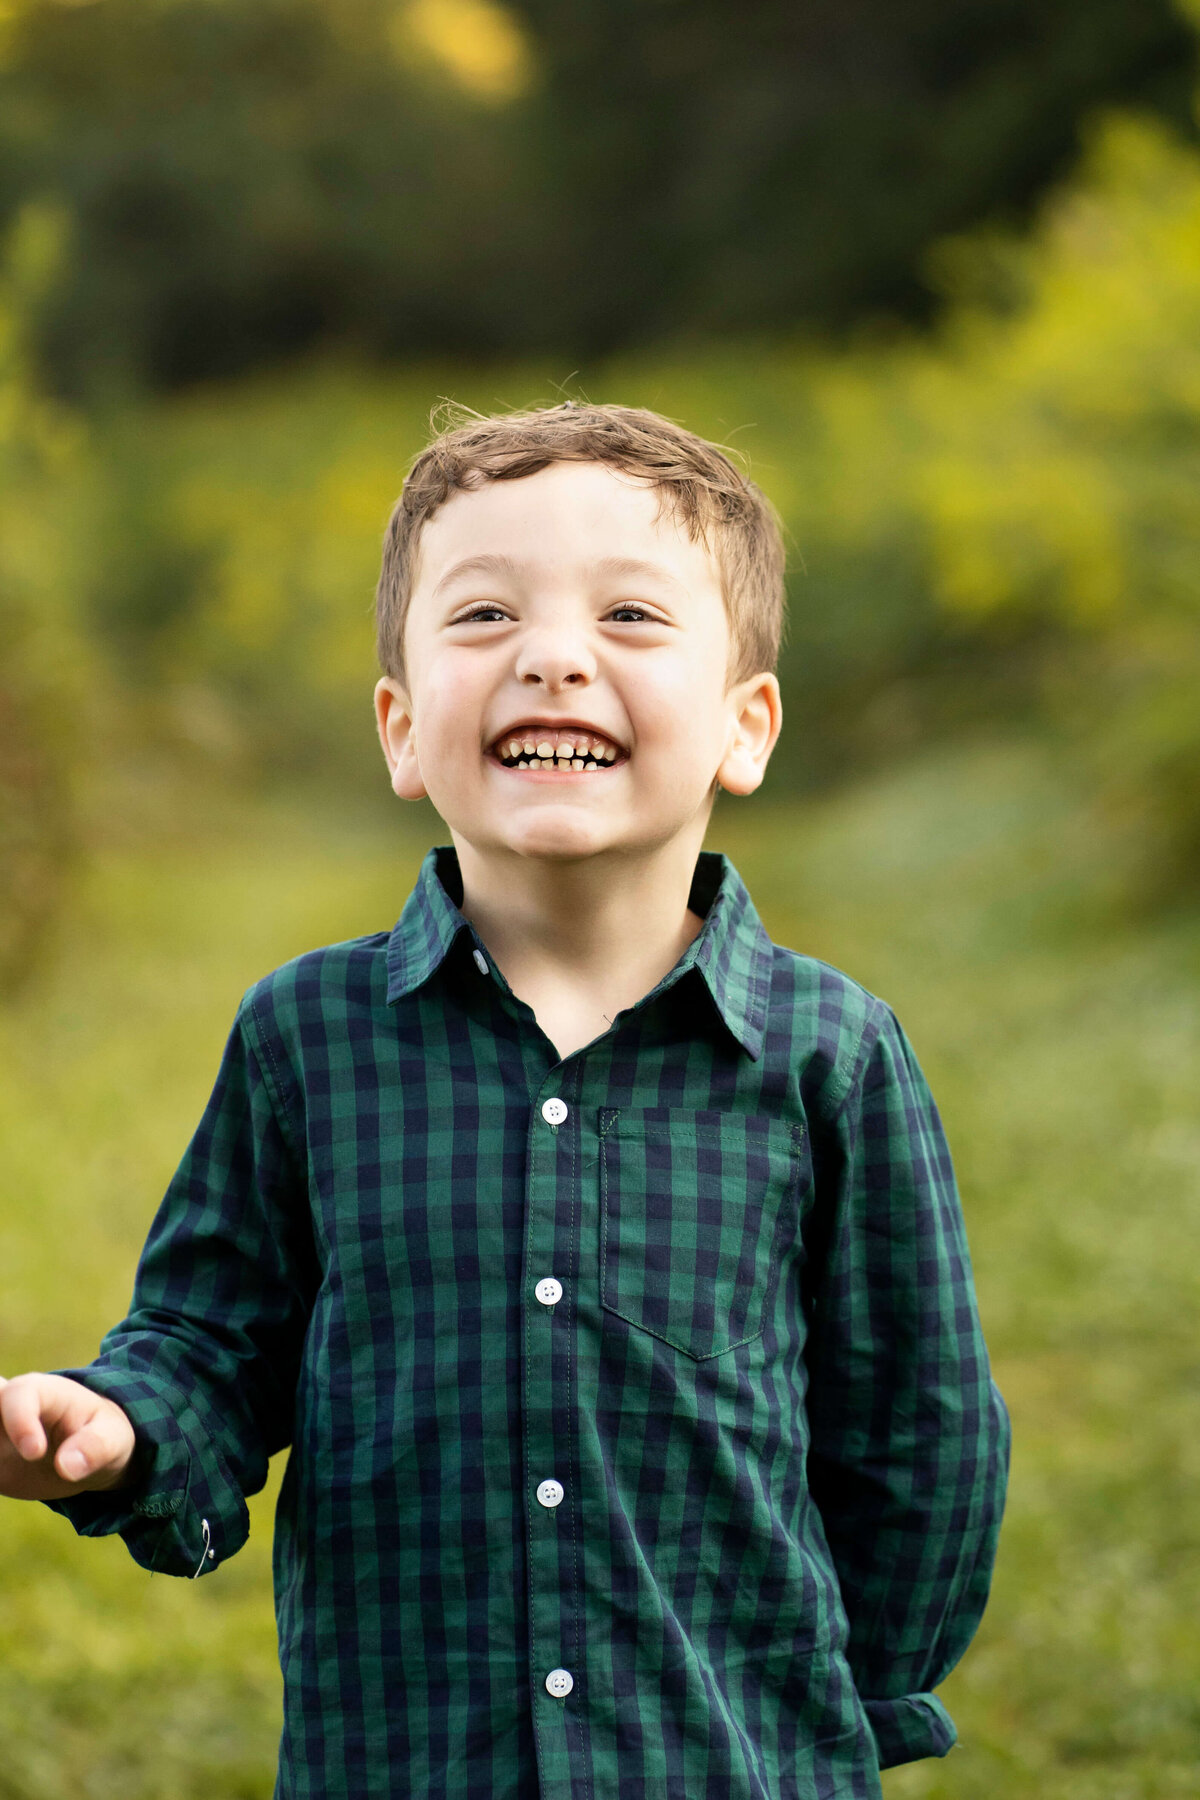 Young boy standing and laughing at camera in a grassy field